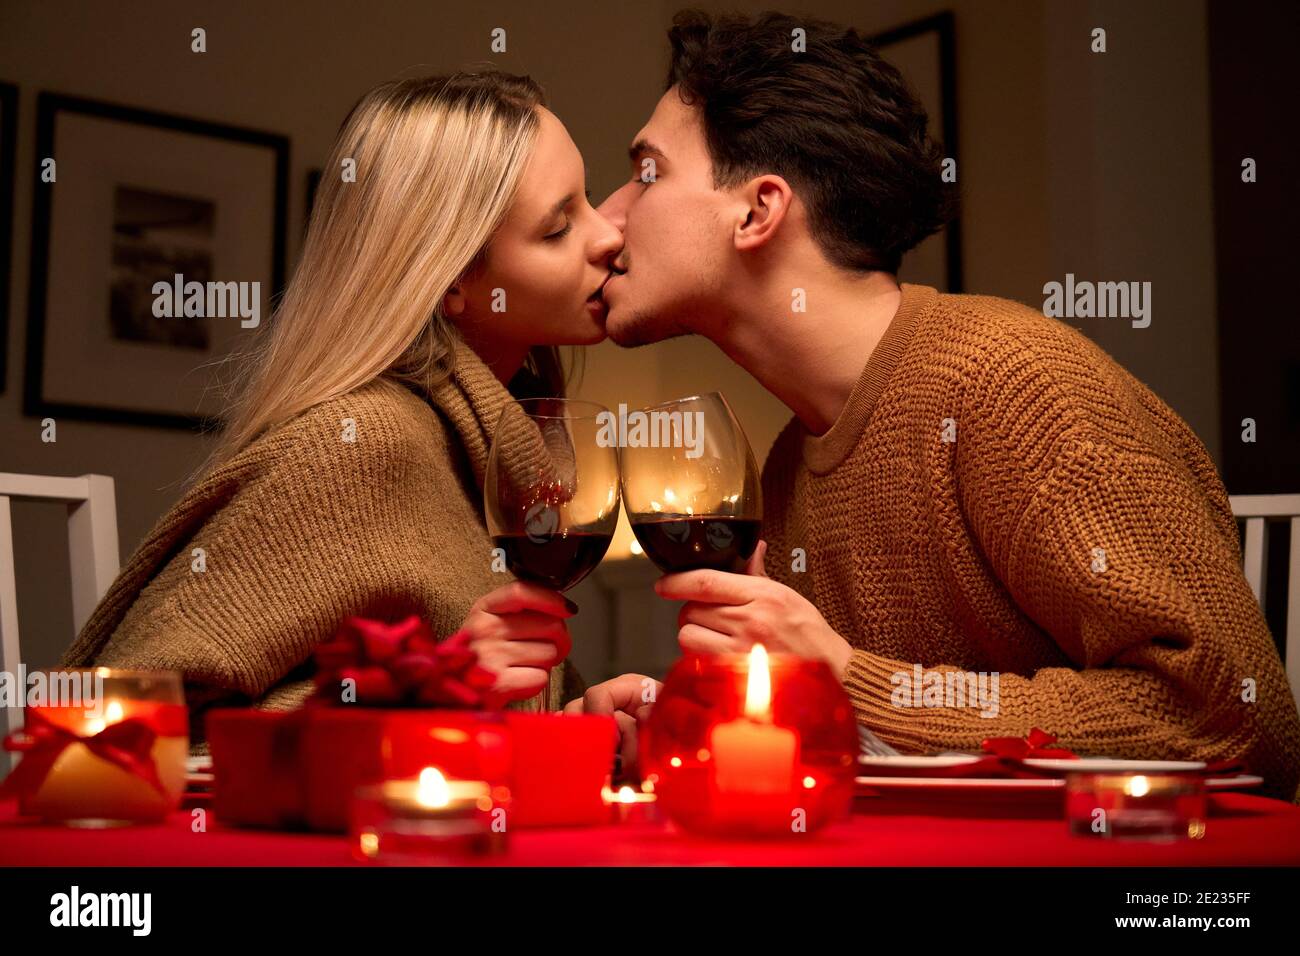 Happy couple in love kissing at romantic dinner at home celebrate anniversary. Stock Photo